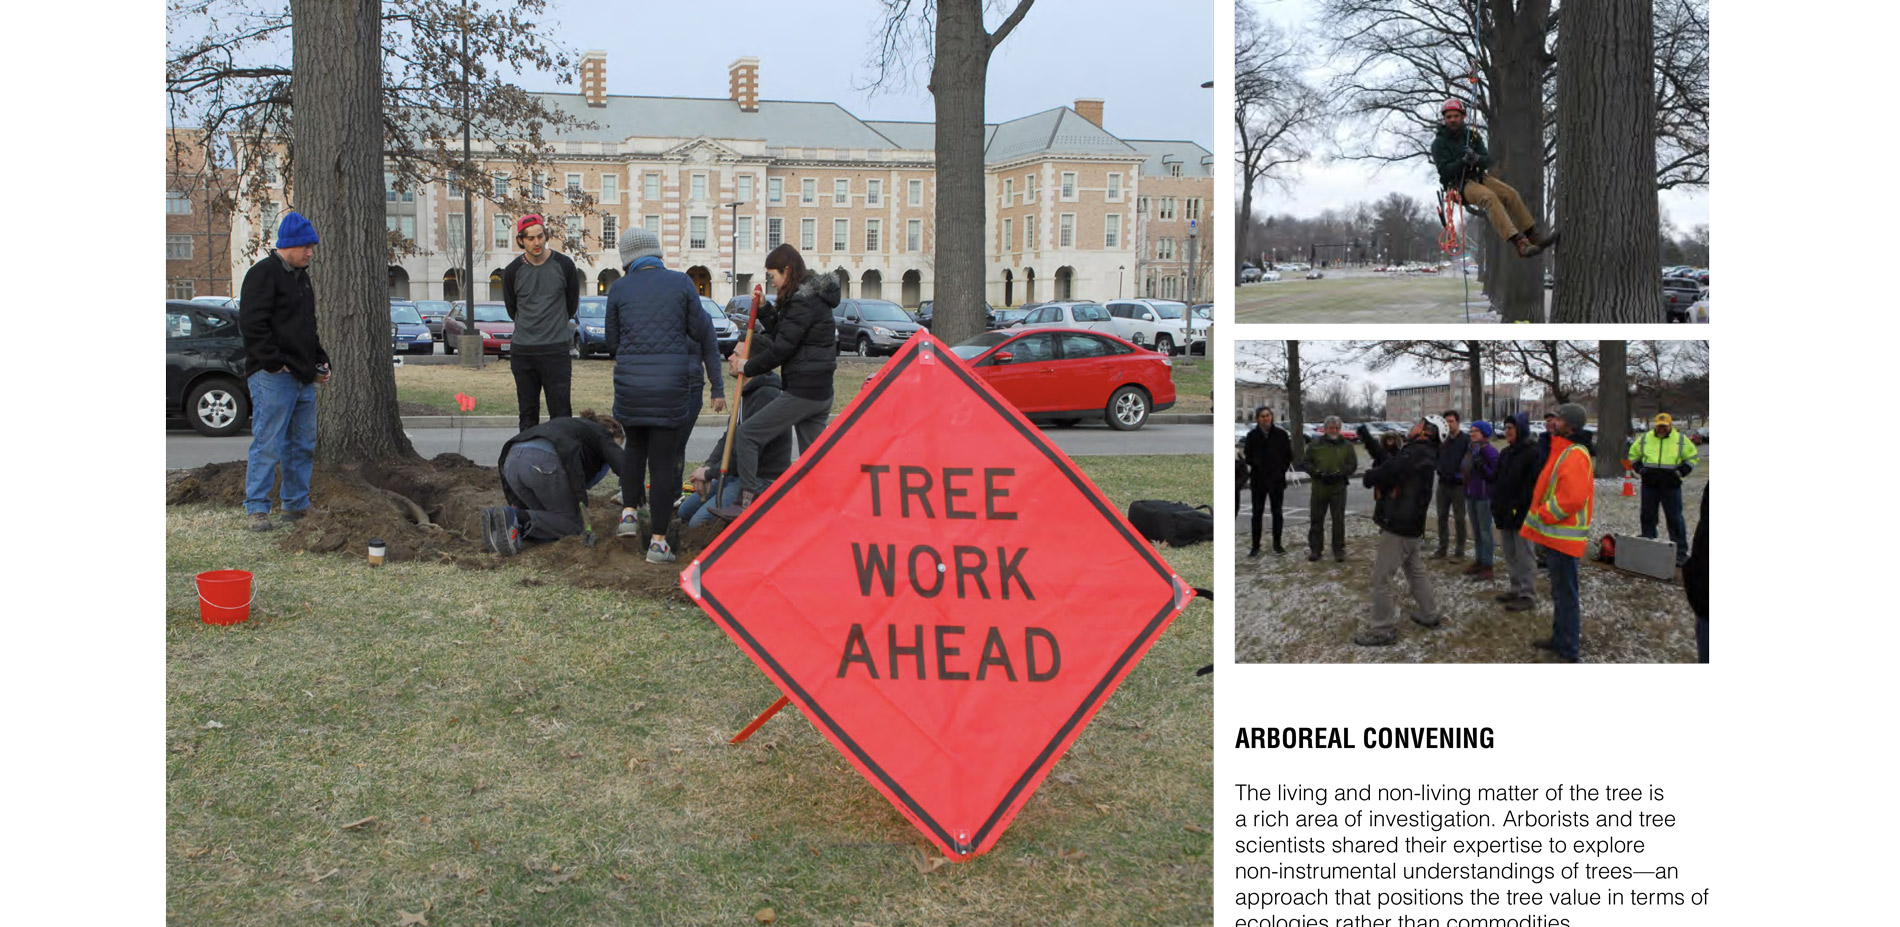 The living and non-living matter of the tree is a rich area of investigation. Arborists and tree scientists shared their expertise to explore non-inst…